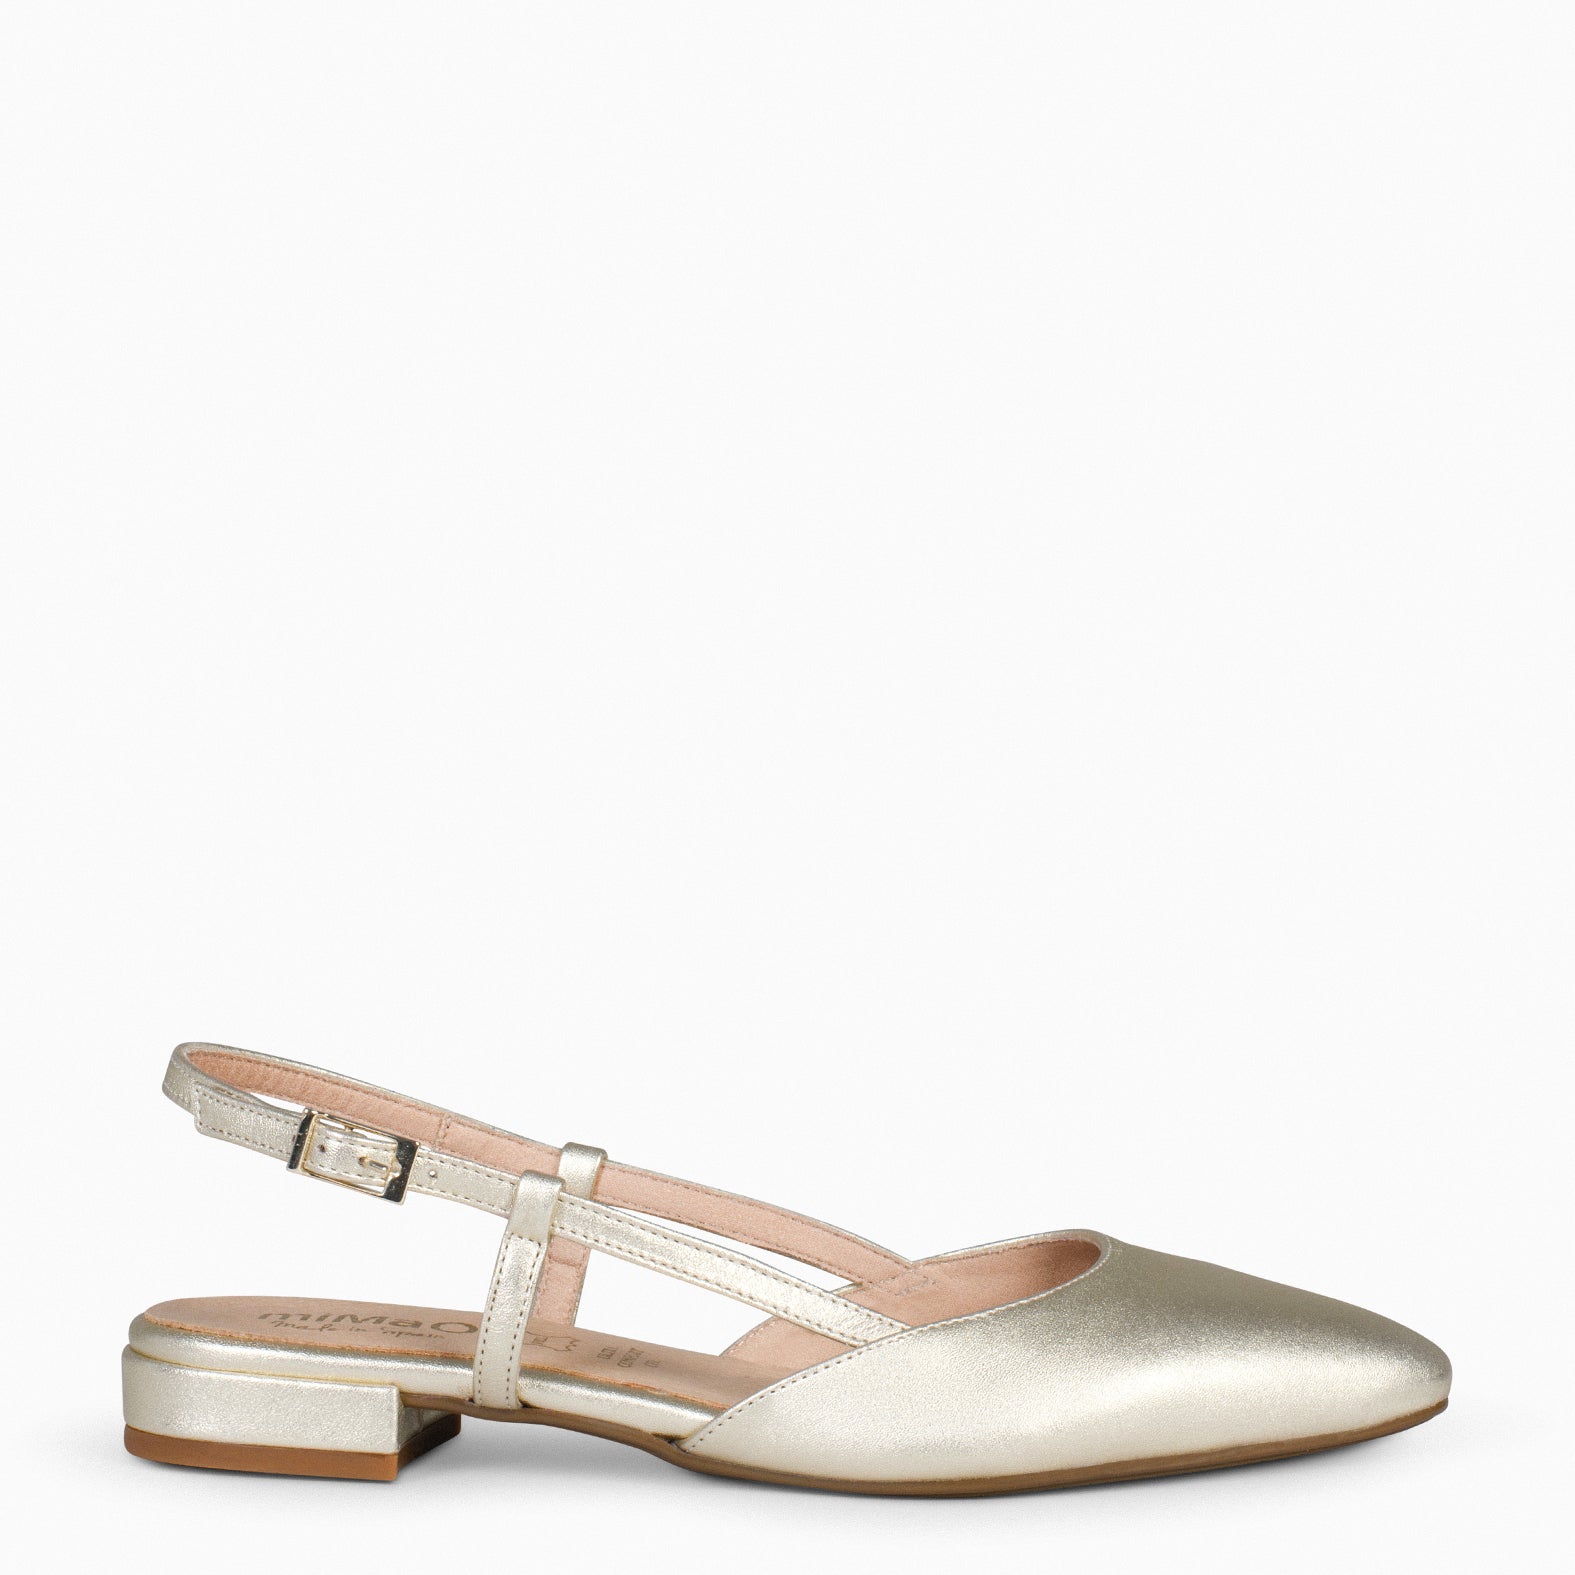 BRUNCH – Chaussures Slingbacks plates OR